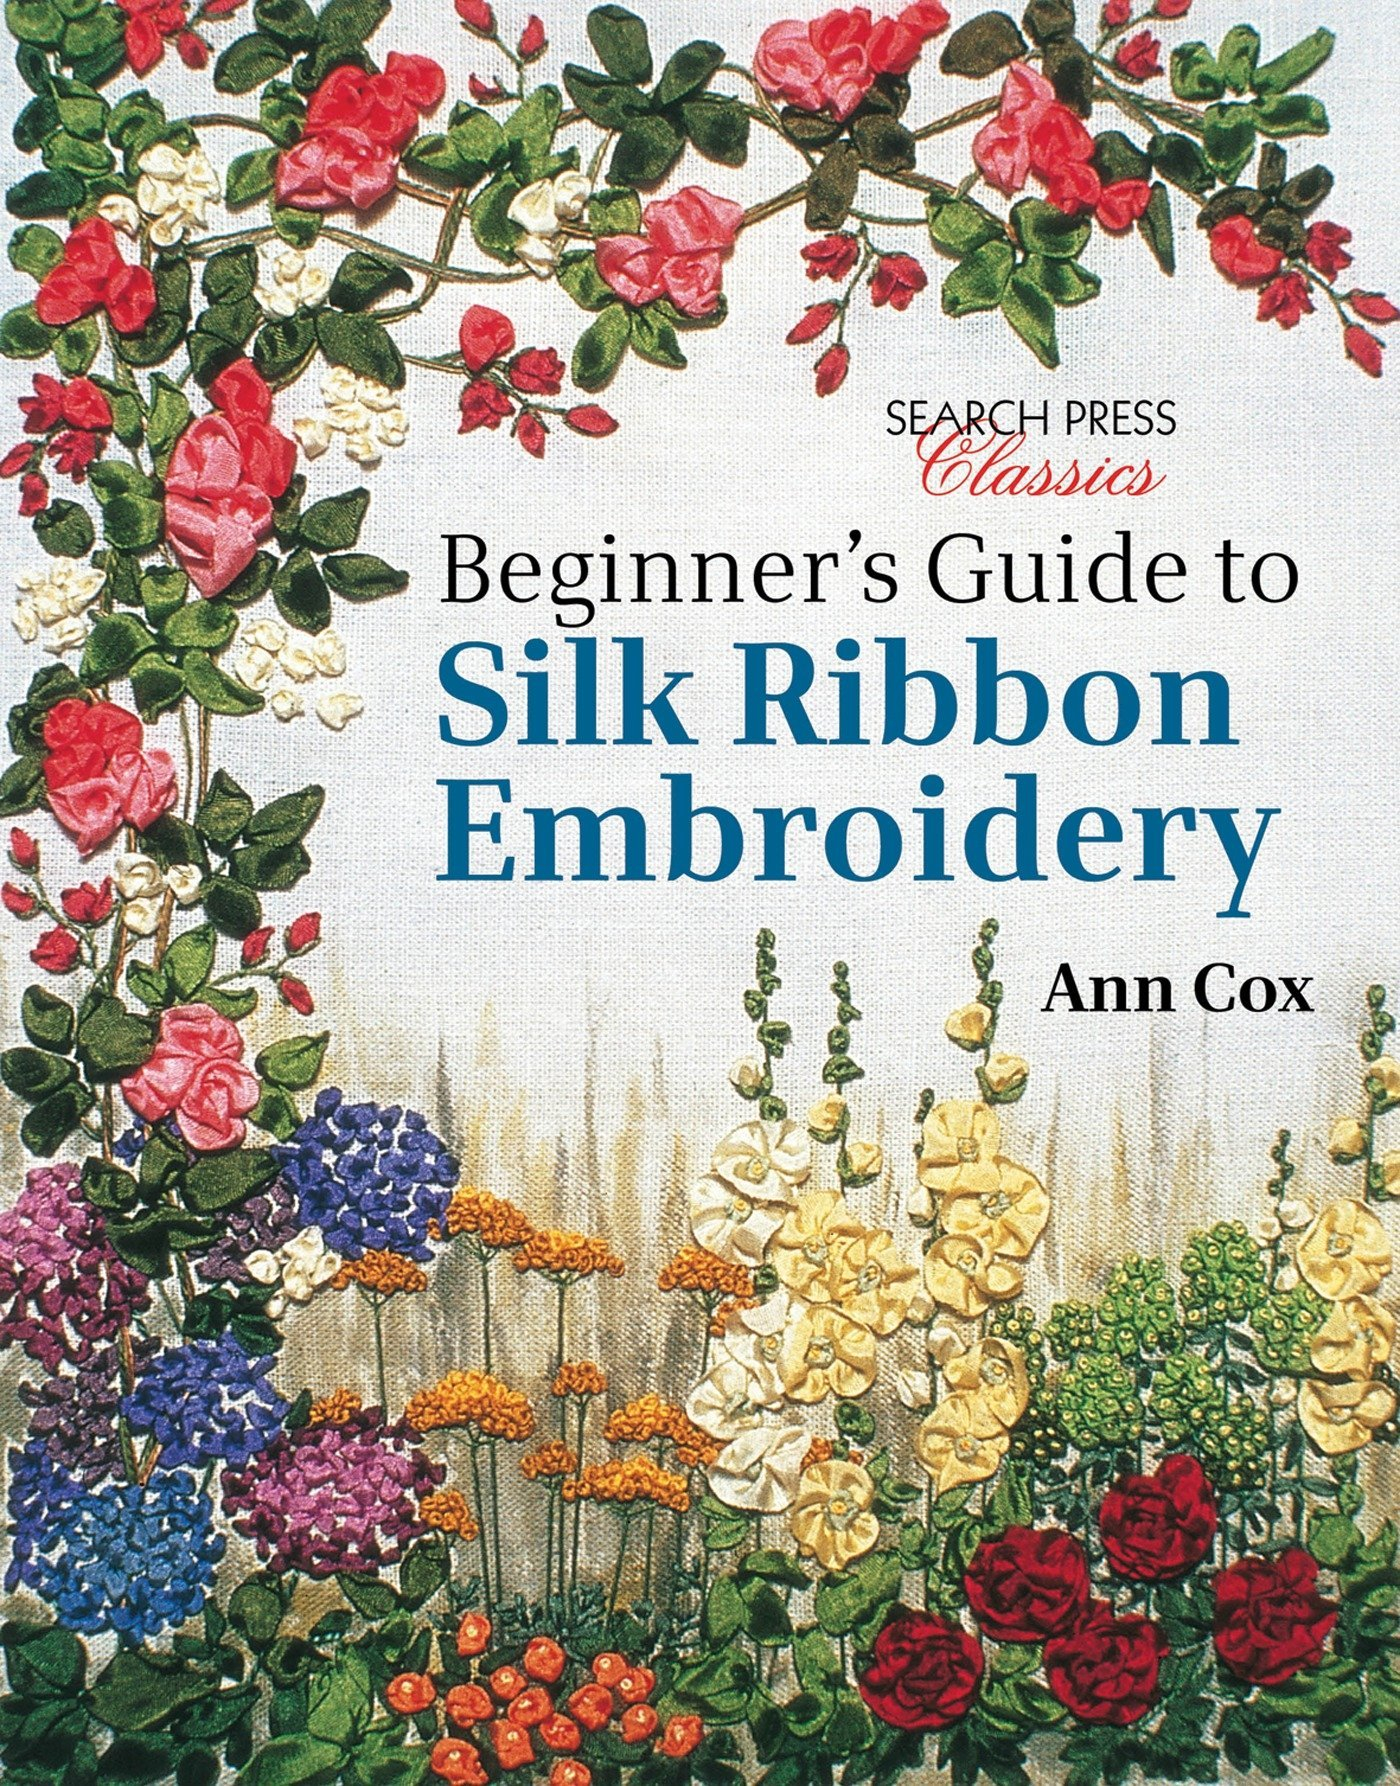 Silk Ribbon Embroidery Patterns How To Silk Ribbon Embroidery Free Embroidery Patterns